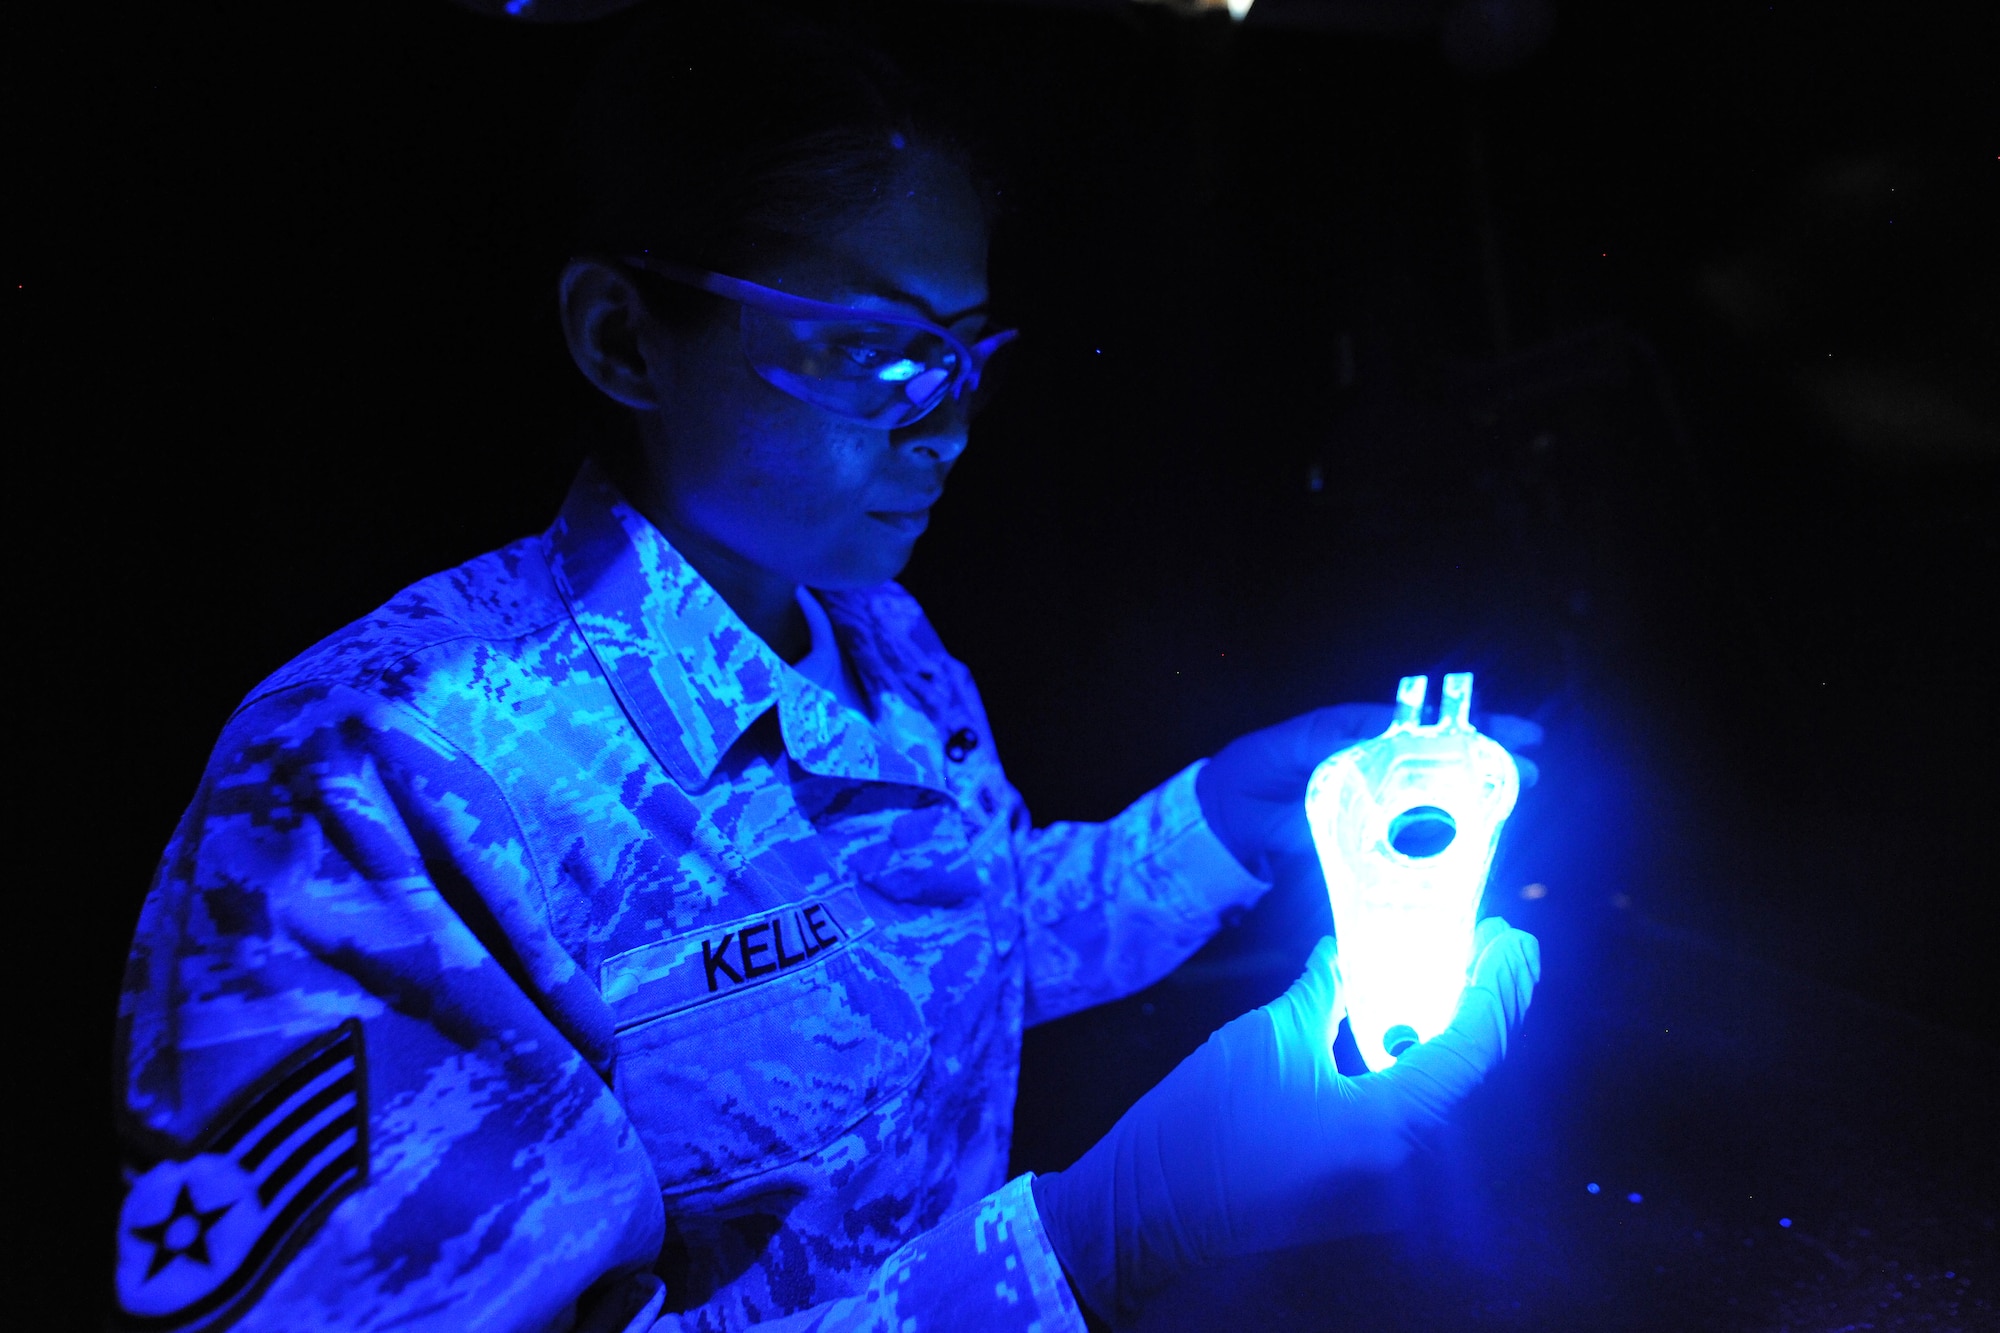 Staff Sgt. Bernadett Kelley, 86th Maintenance Squadron nondestructive inspection technician, views a part underneath black light during the inspection step of the penetrant process, July 31, 2013, Ramstein Air Base, Germany.  Any penetrant that has seeped into cracks is now visible due to the penetrants natural fluorescence under black light. (U.S. Air Force photo/Senior Airman Chris Willis)